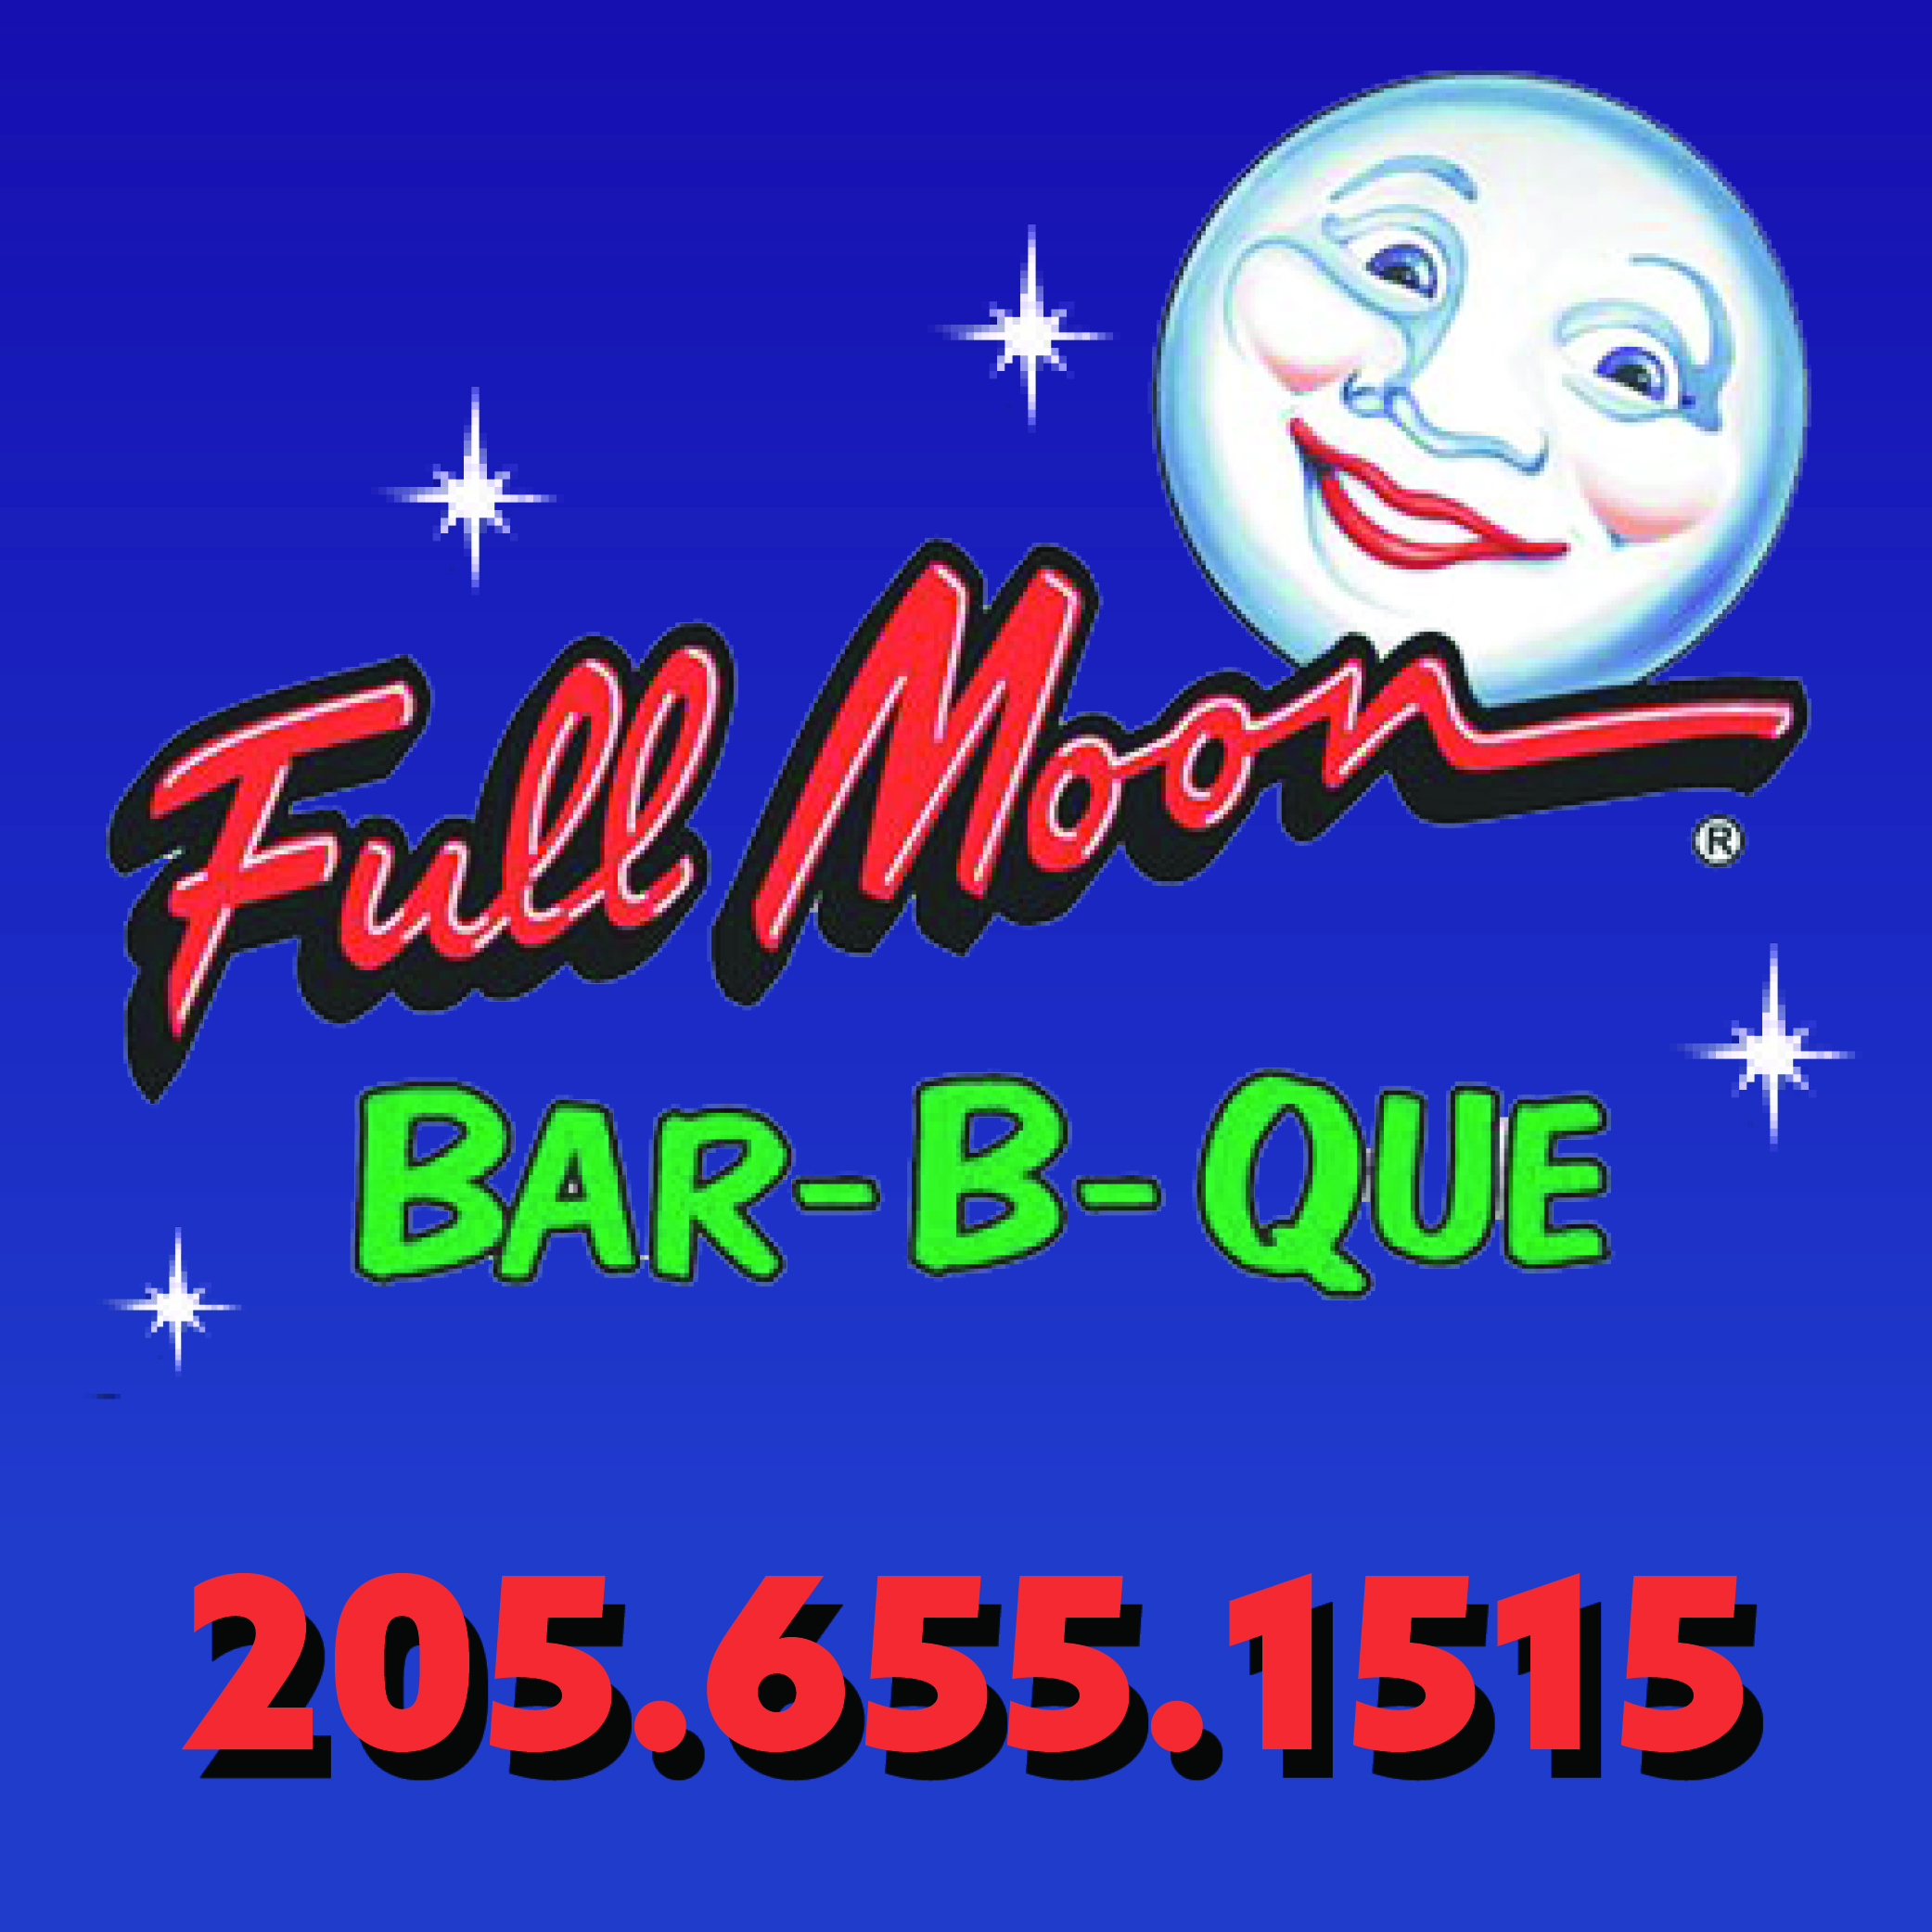 Full Moon Barbeque